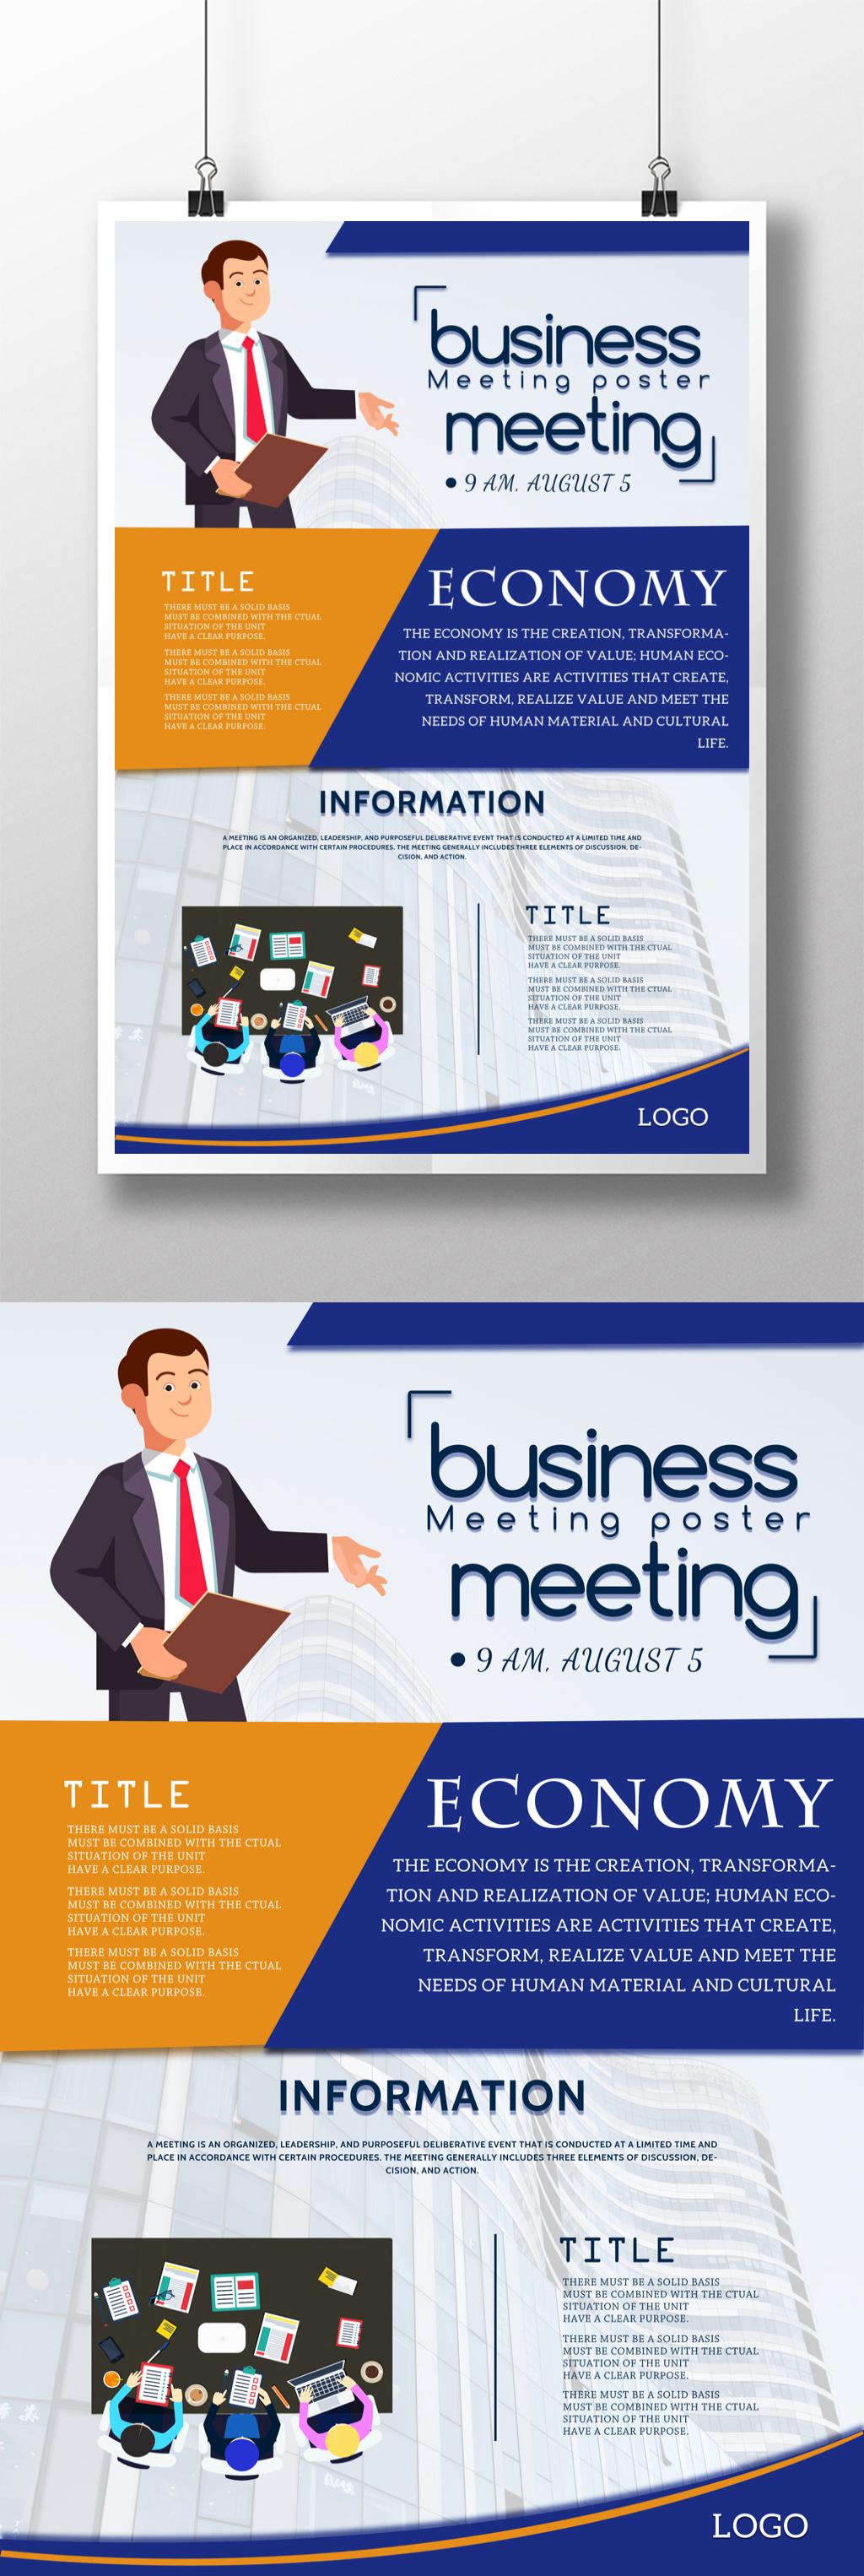 Business style company business meeting invitation template image